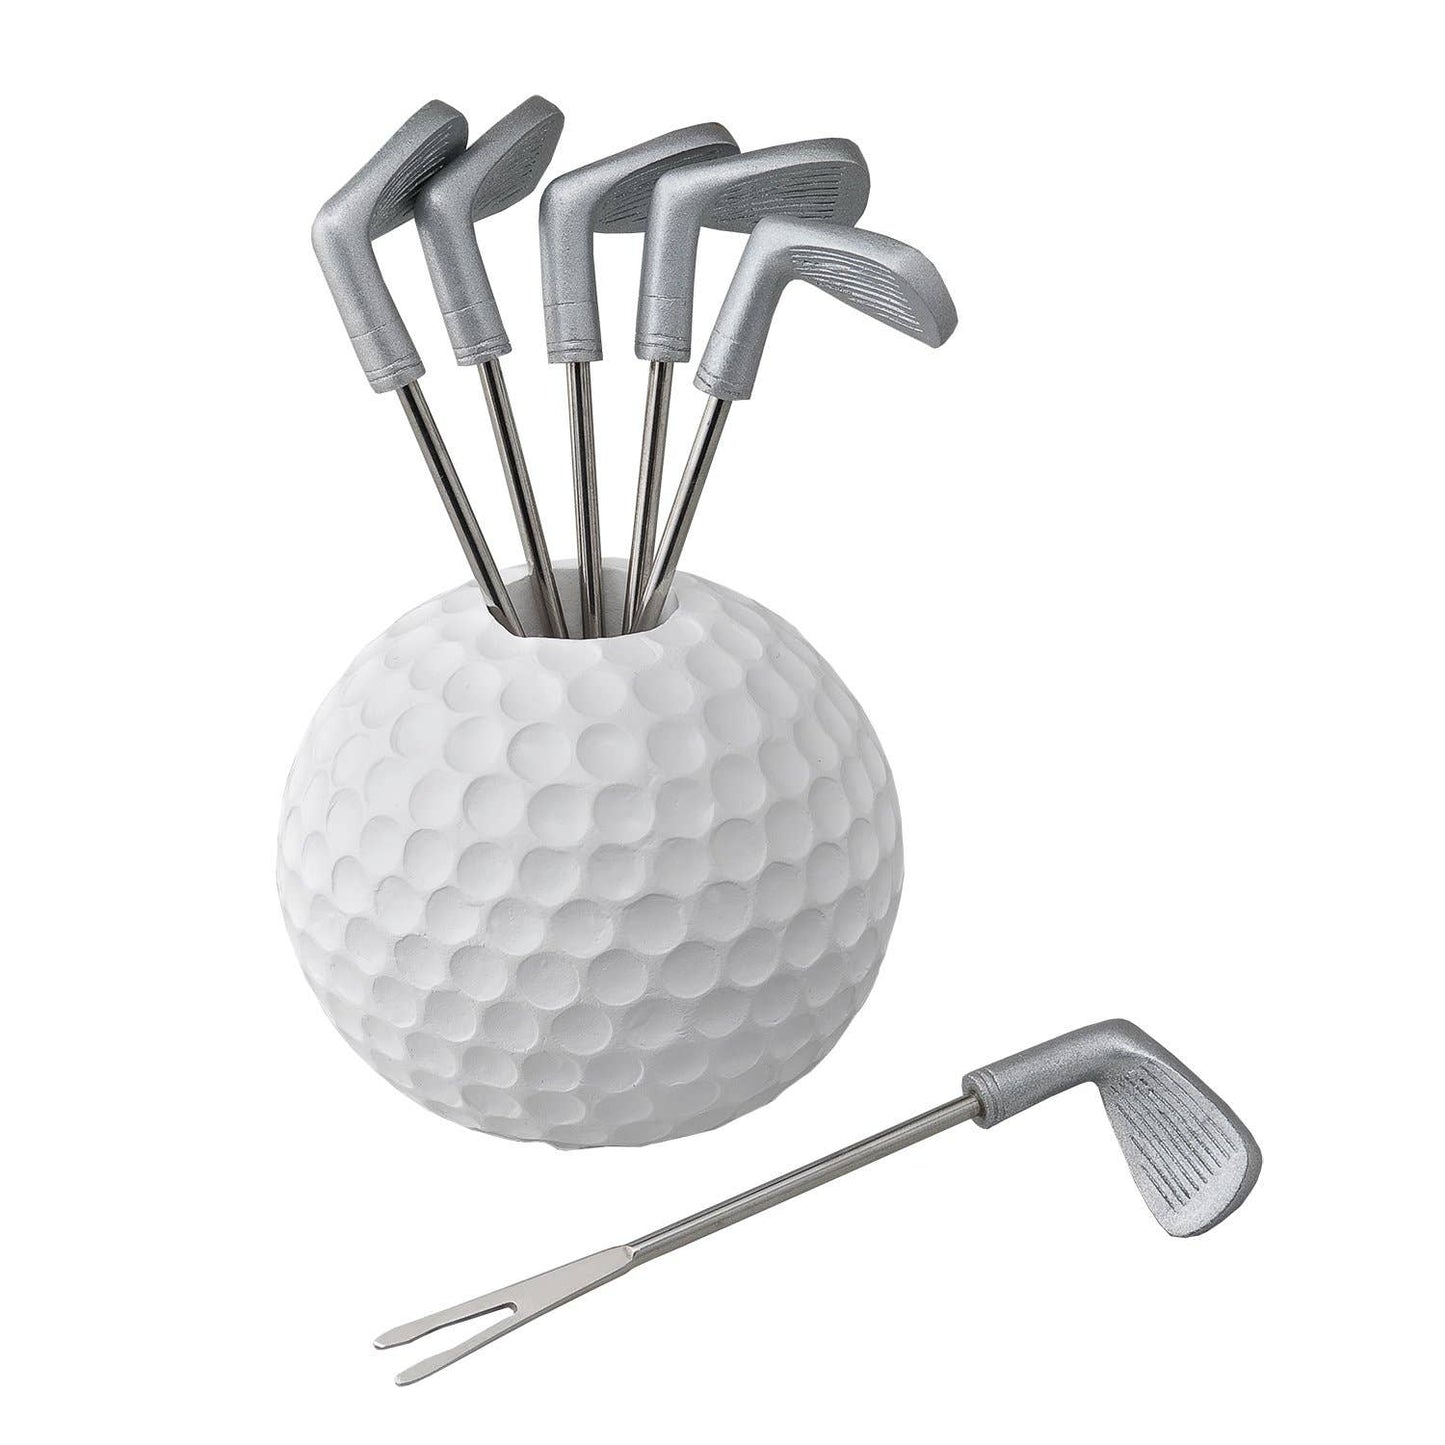 6-Piece Golf Cocktail Pick with Holder